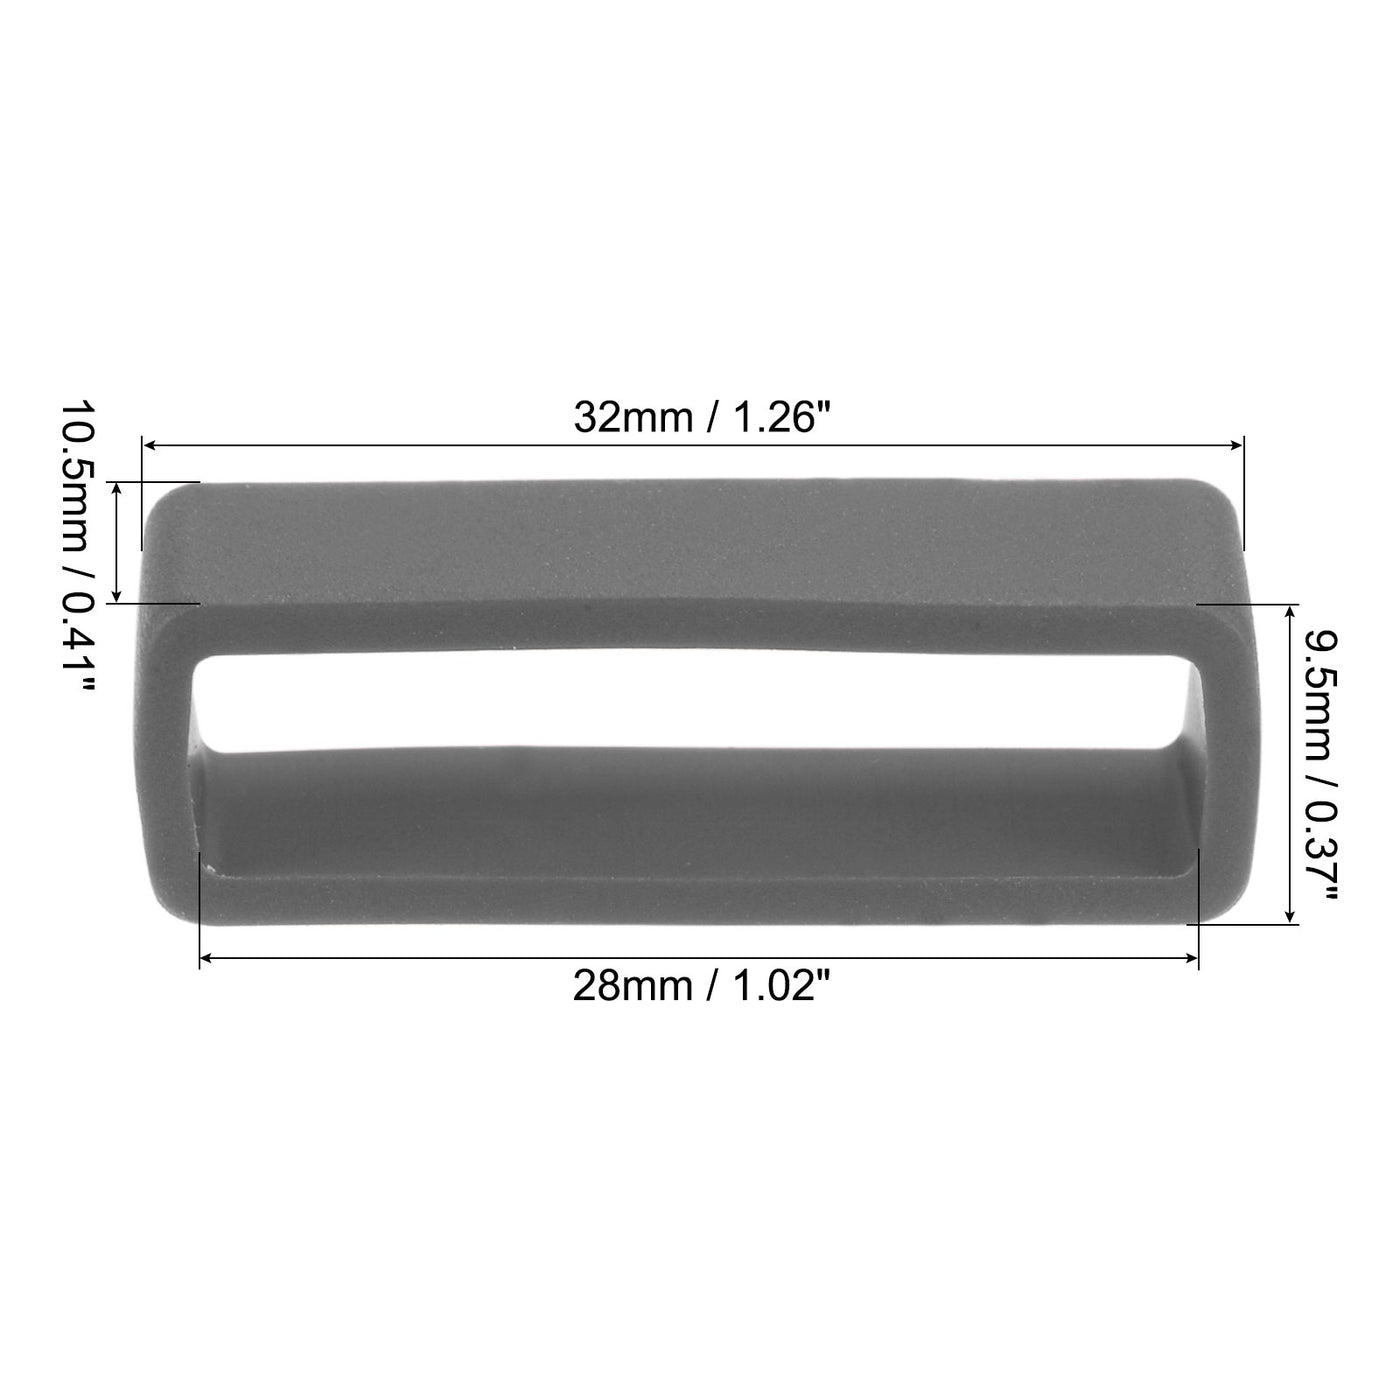 Uxcell Uxcell Watch Band Strap Loops Silicone for 28mm Width Watch Band, Deep Gray 4 Pcs